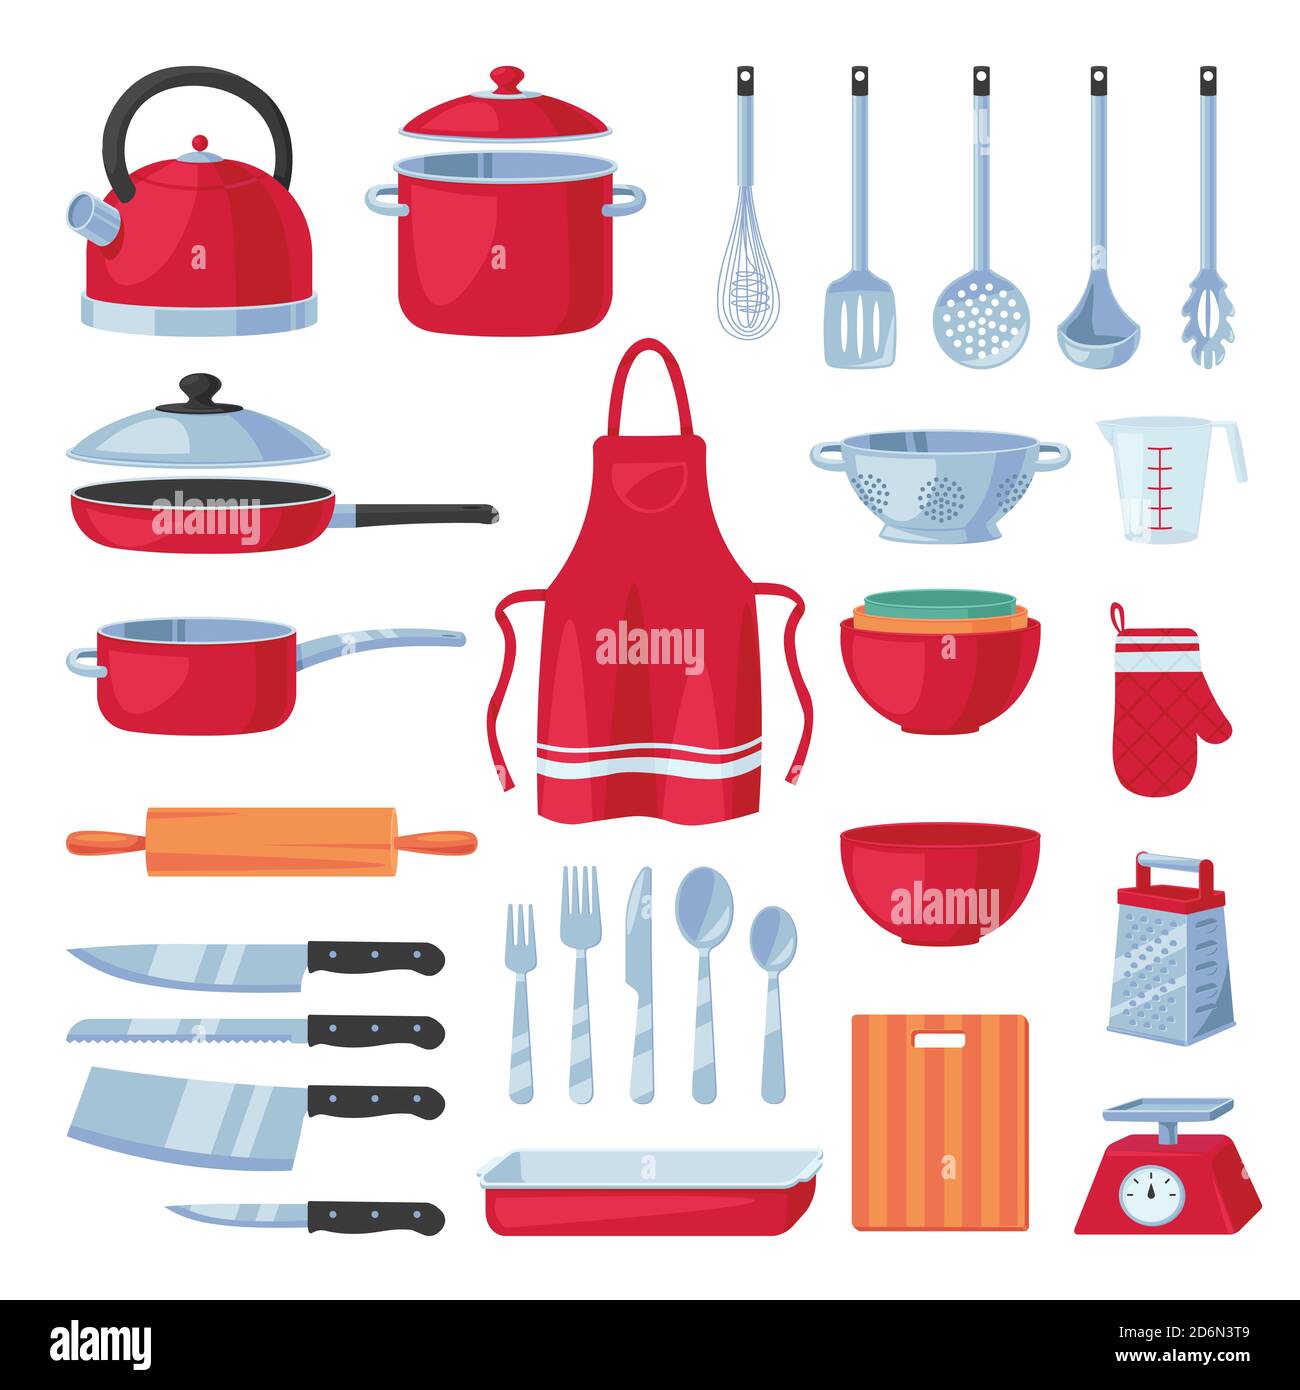 https://c8.alamy.com/comp/2D6N3T9/kitchen-utensil-design-elements-set-isolated-on-white-background-vector-cooking-and-kitchenware-modern-tools-collection-household-flat-cartoon-icon-2D6N3T9.jpg